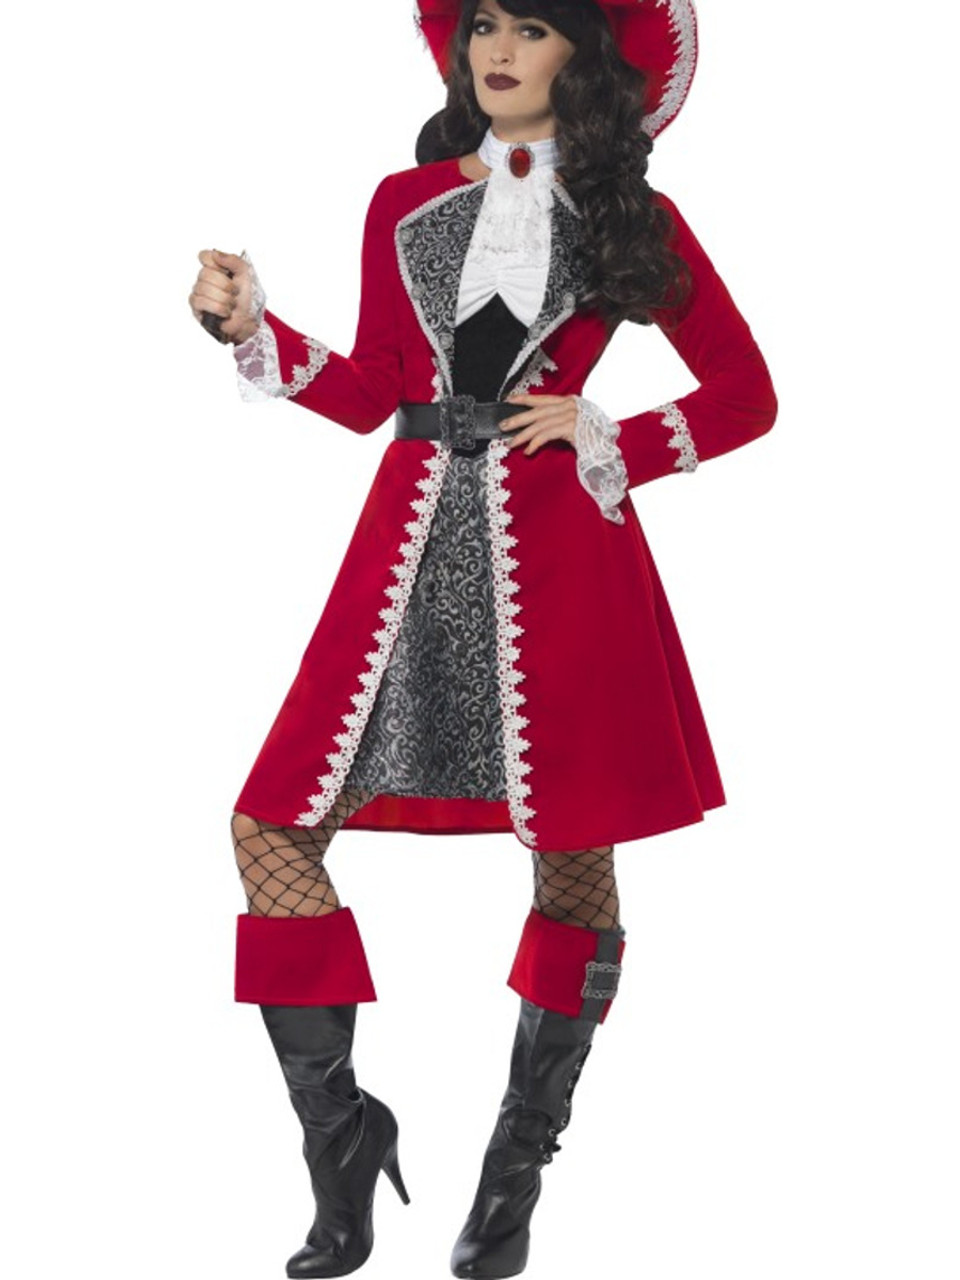 Women's Scarlet Red Pirate Captain Costume